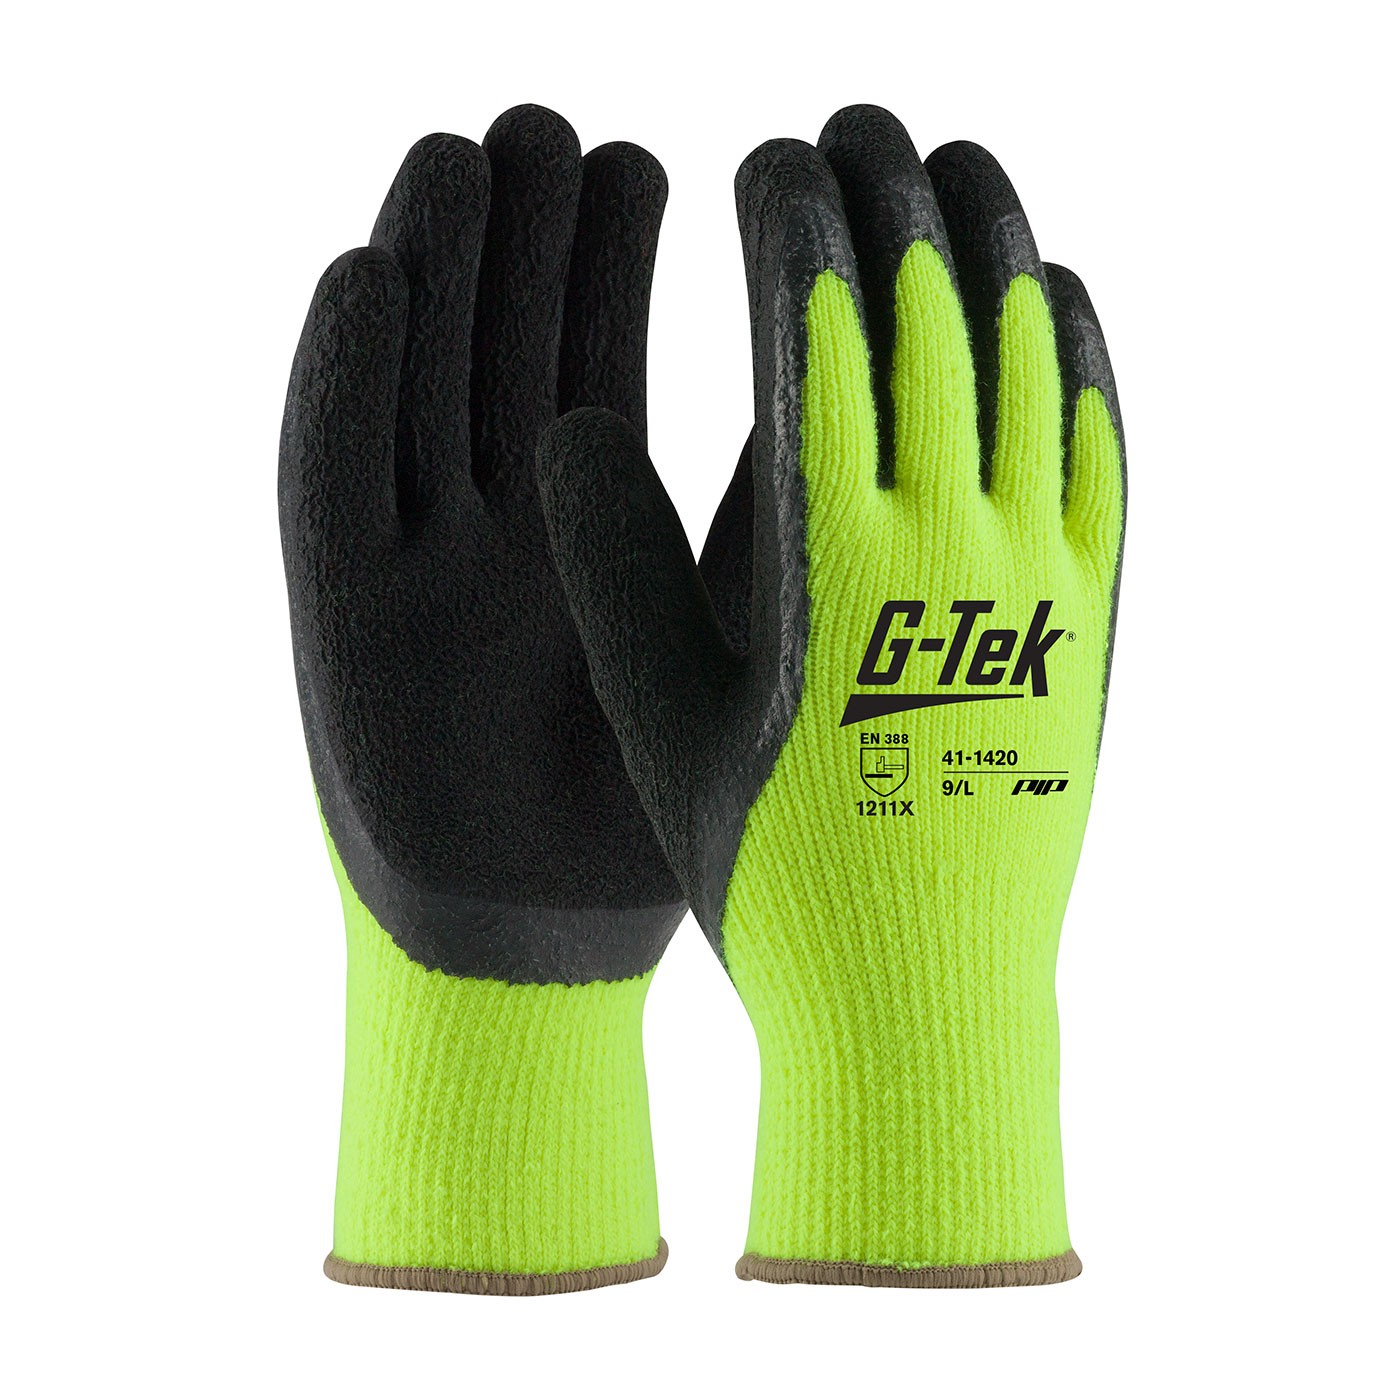 G-Tek® Hi-Vis Seamless Knit Acrylic Terry Glove with Latex Coated Crinkle Grip on Palm & Fingers  (#41-1420)